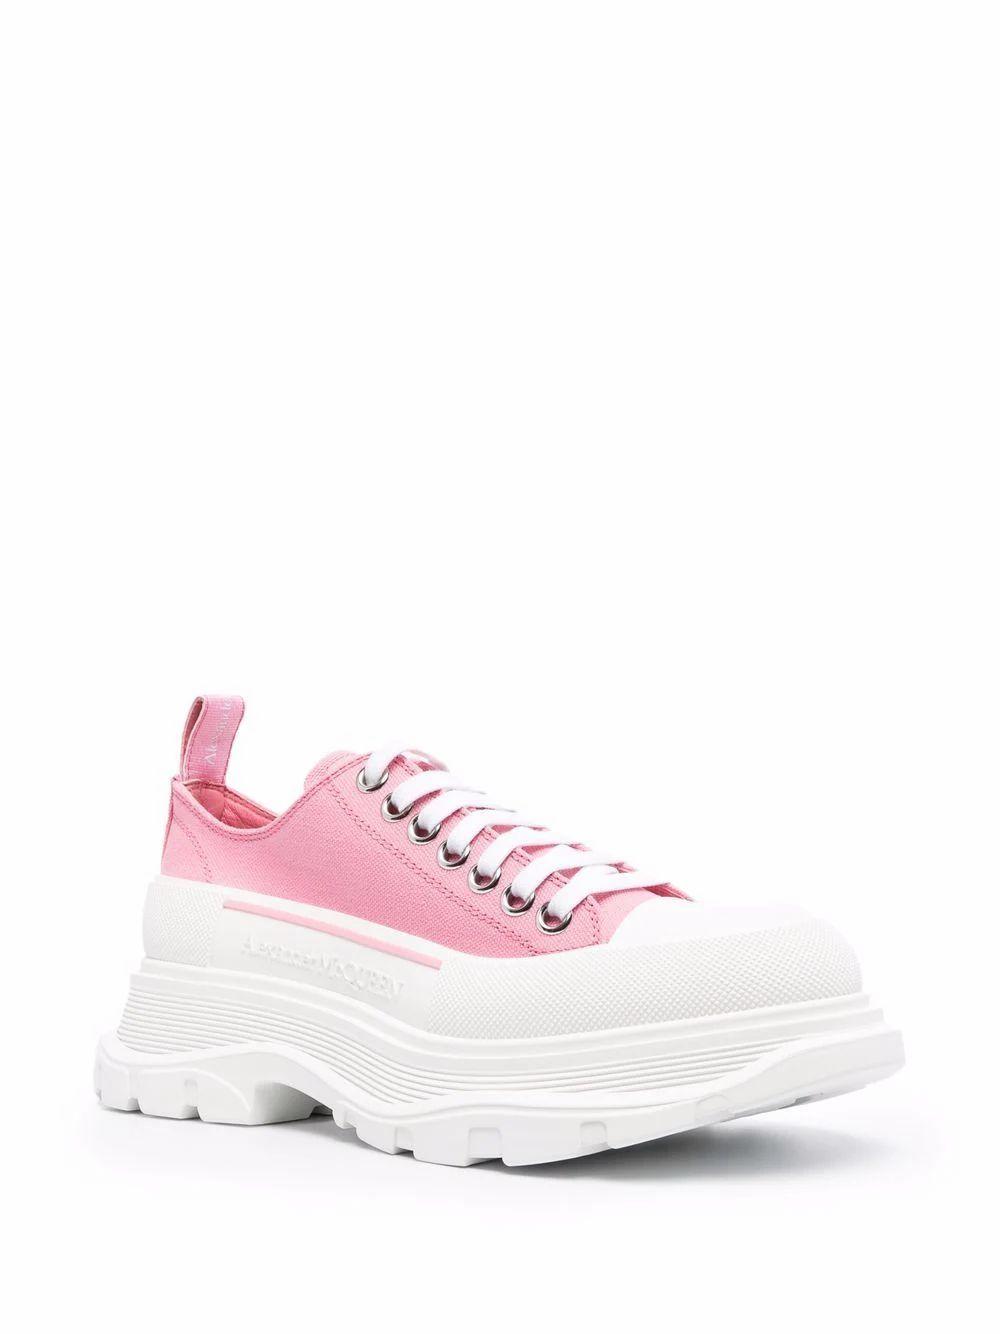 Alexander McQueen Canvas Pink Tread Slick Lace Up Shoes 